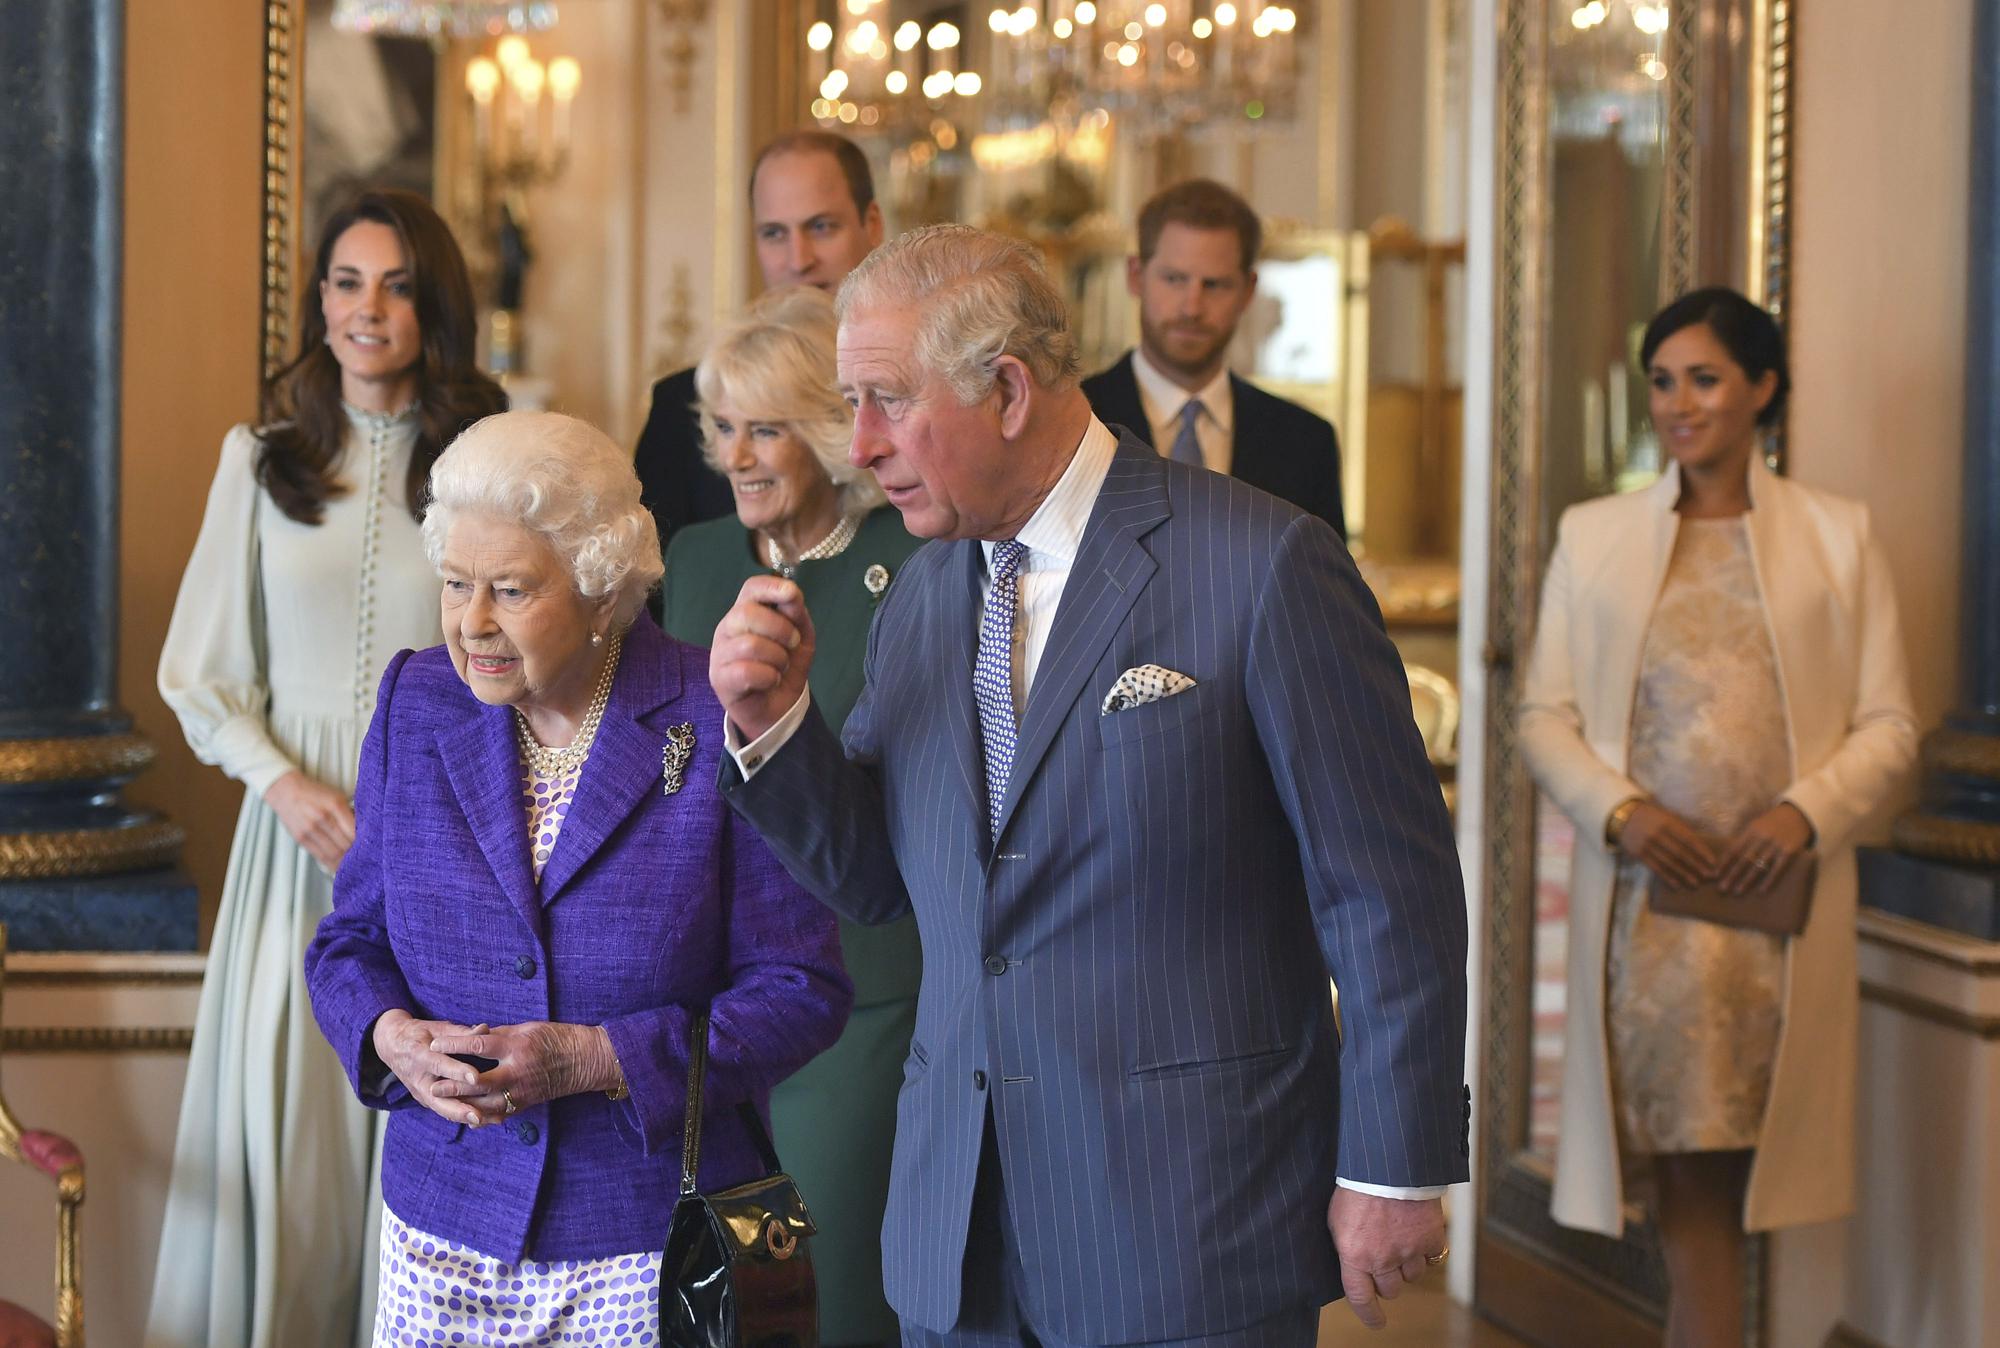 FILE - In this March 5, 2019 file photo, Britain's Queen Elizabeth II is joined by Prince Charles, the Prince of Wales, and at rear, from left, Kate, Duchess of Cambridge, Camilla, Duchess of Cornwall, Prince William, Prince Harry and Meghan, Duchess of Sussex during a reception at Buckingham Palace, London to mark the 50th anniversary of the investiture of the Prince of Wales. Prince Charles has been preparing for the crown his entire life. Now, that moment has finally arrived. Charles, the oldest person to ever assume the British throne, became king on Thursday Sept. 8, 2022, following the death of his mother, Queen Elizabeth II.  (Dominic Lipinski/Pool via AP, File)